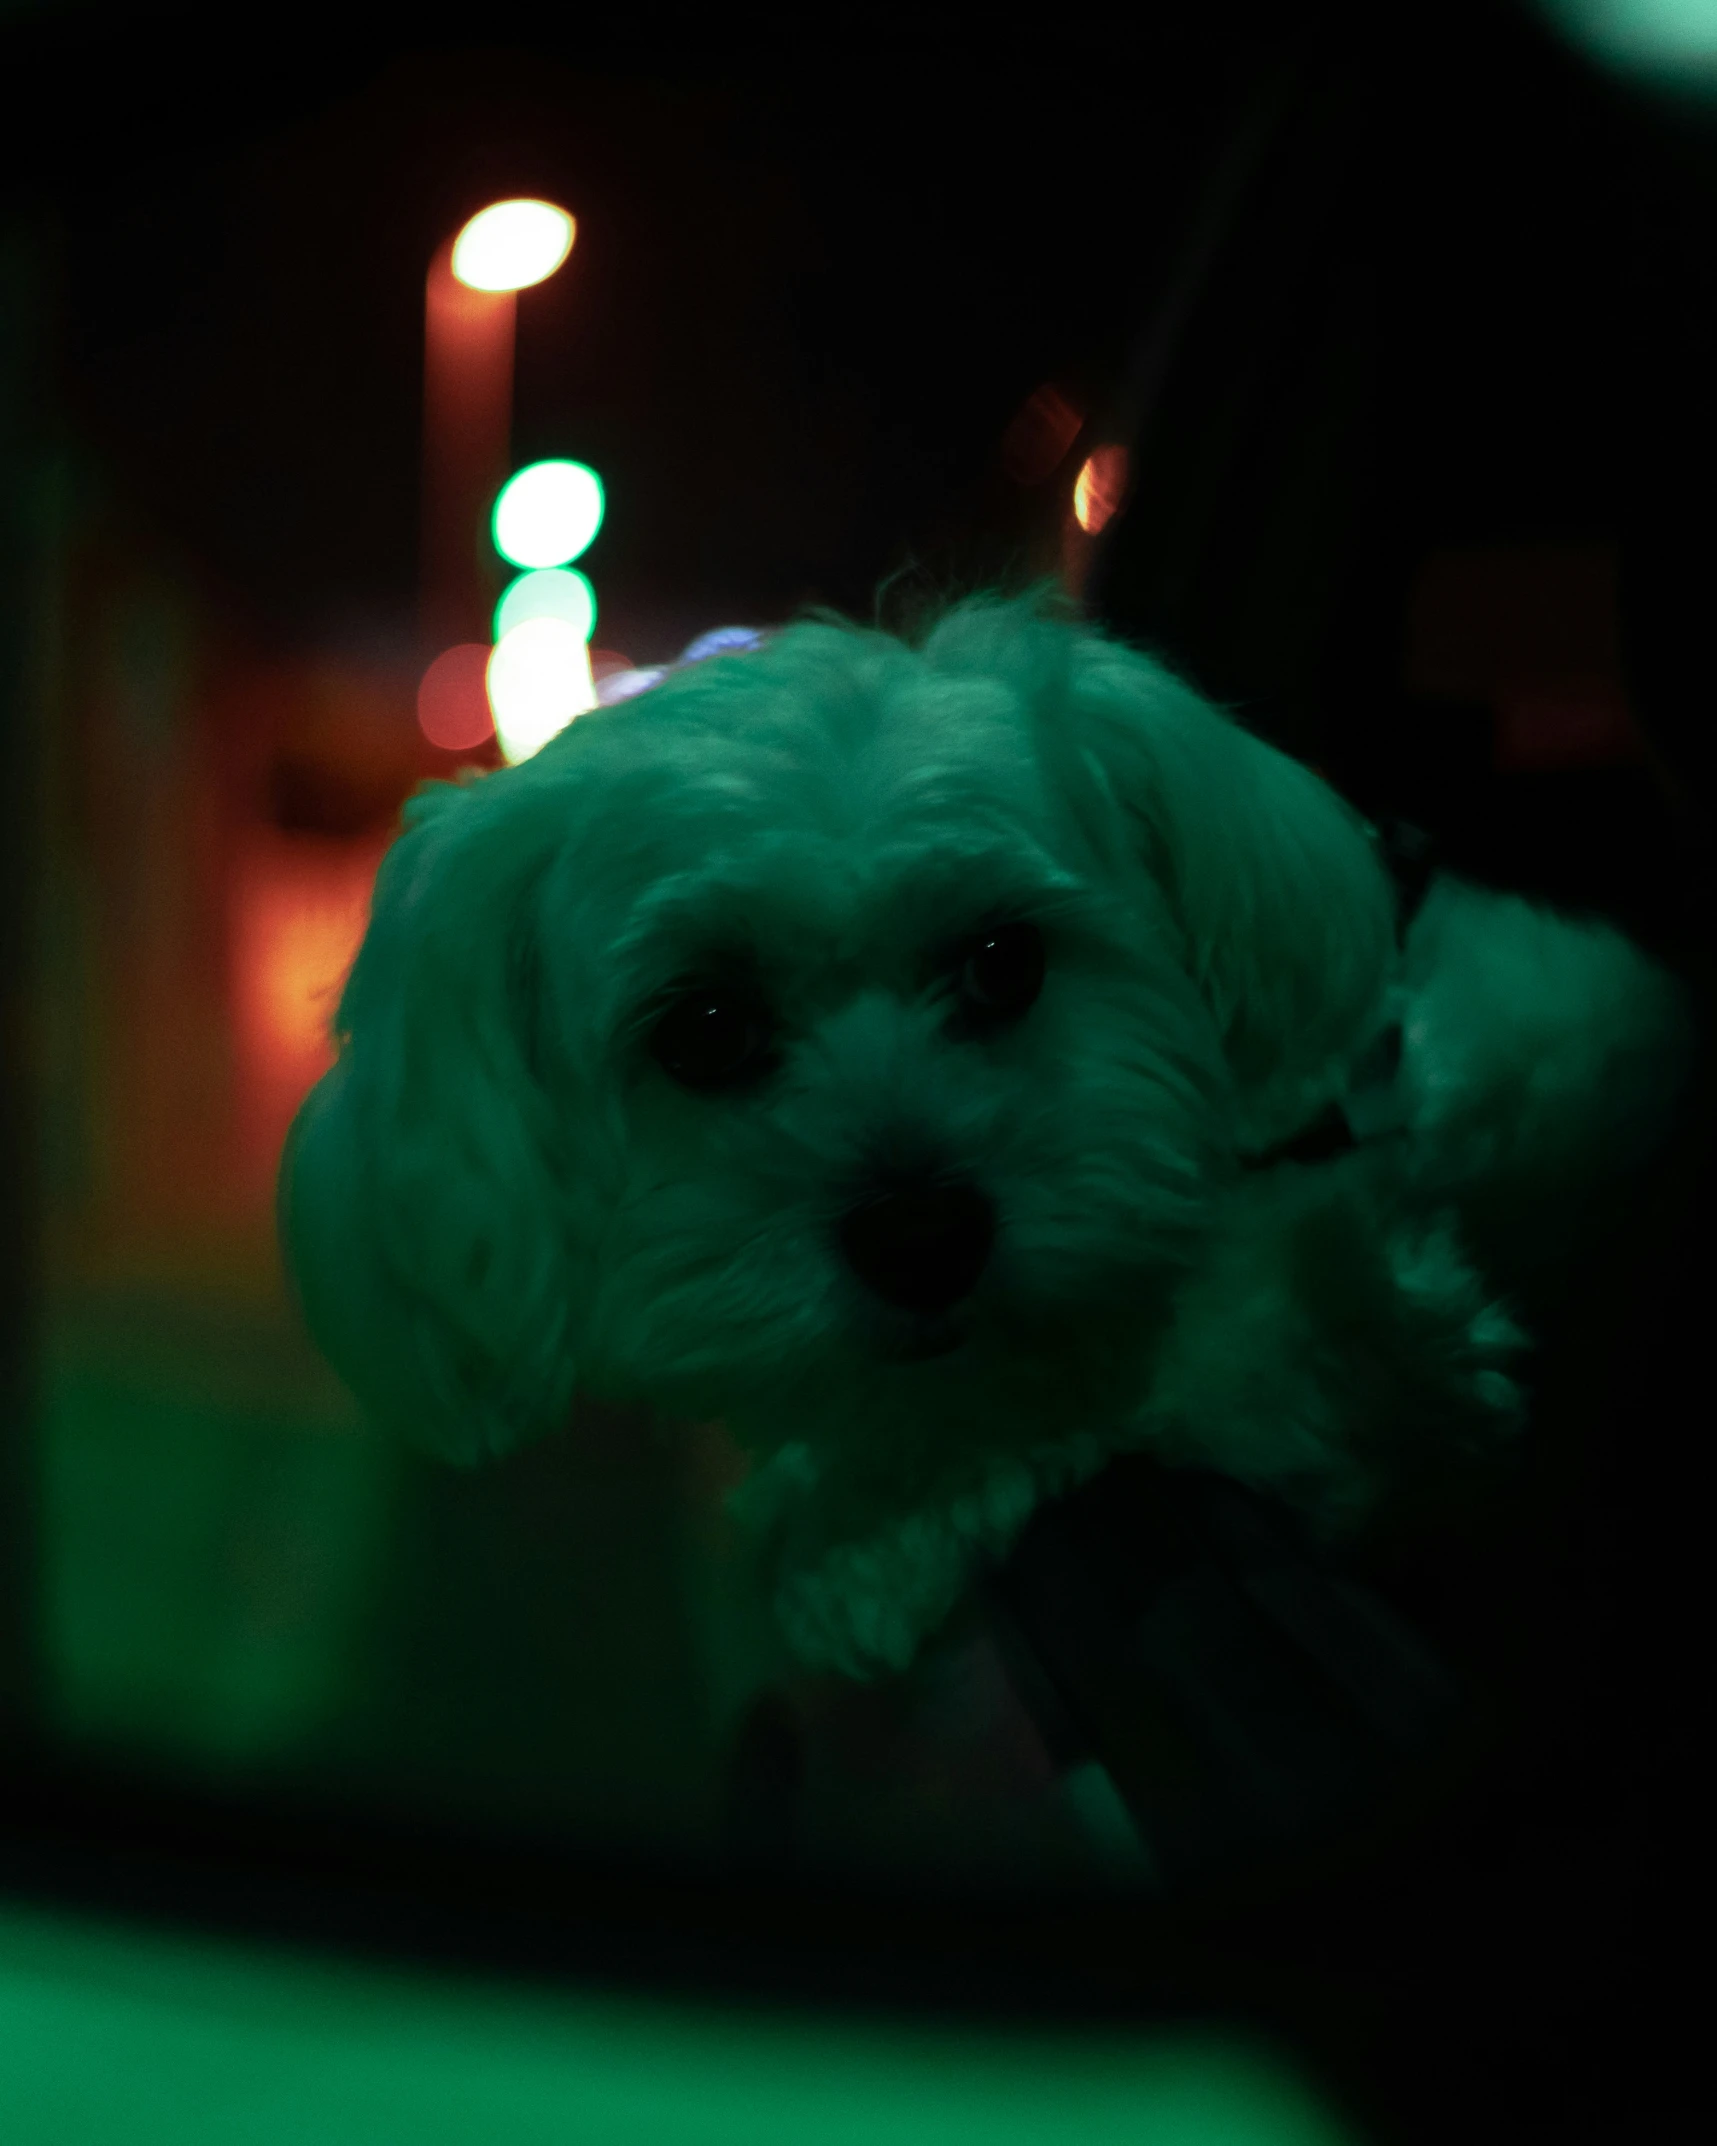 a reflection in a car window shows a small dog on the passenger seat